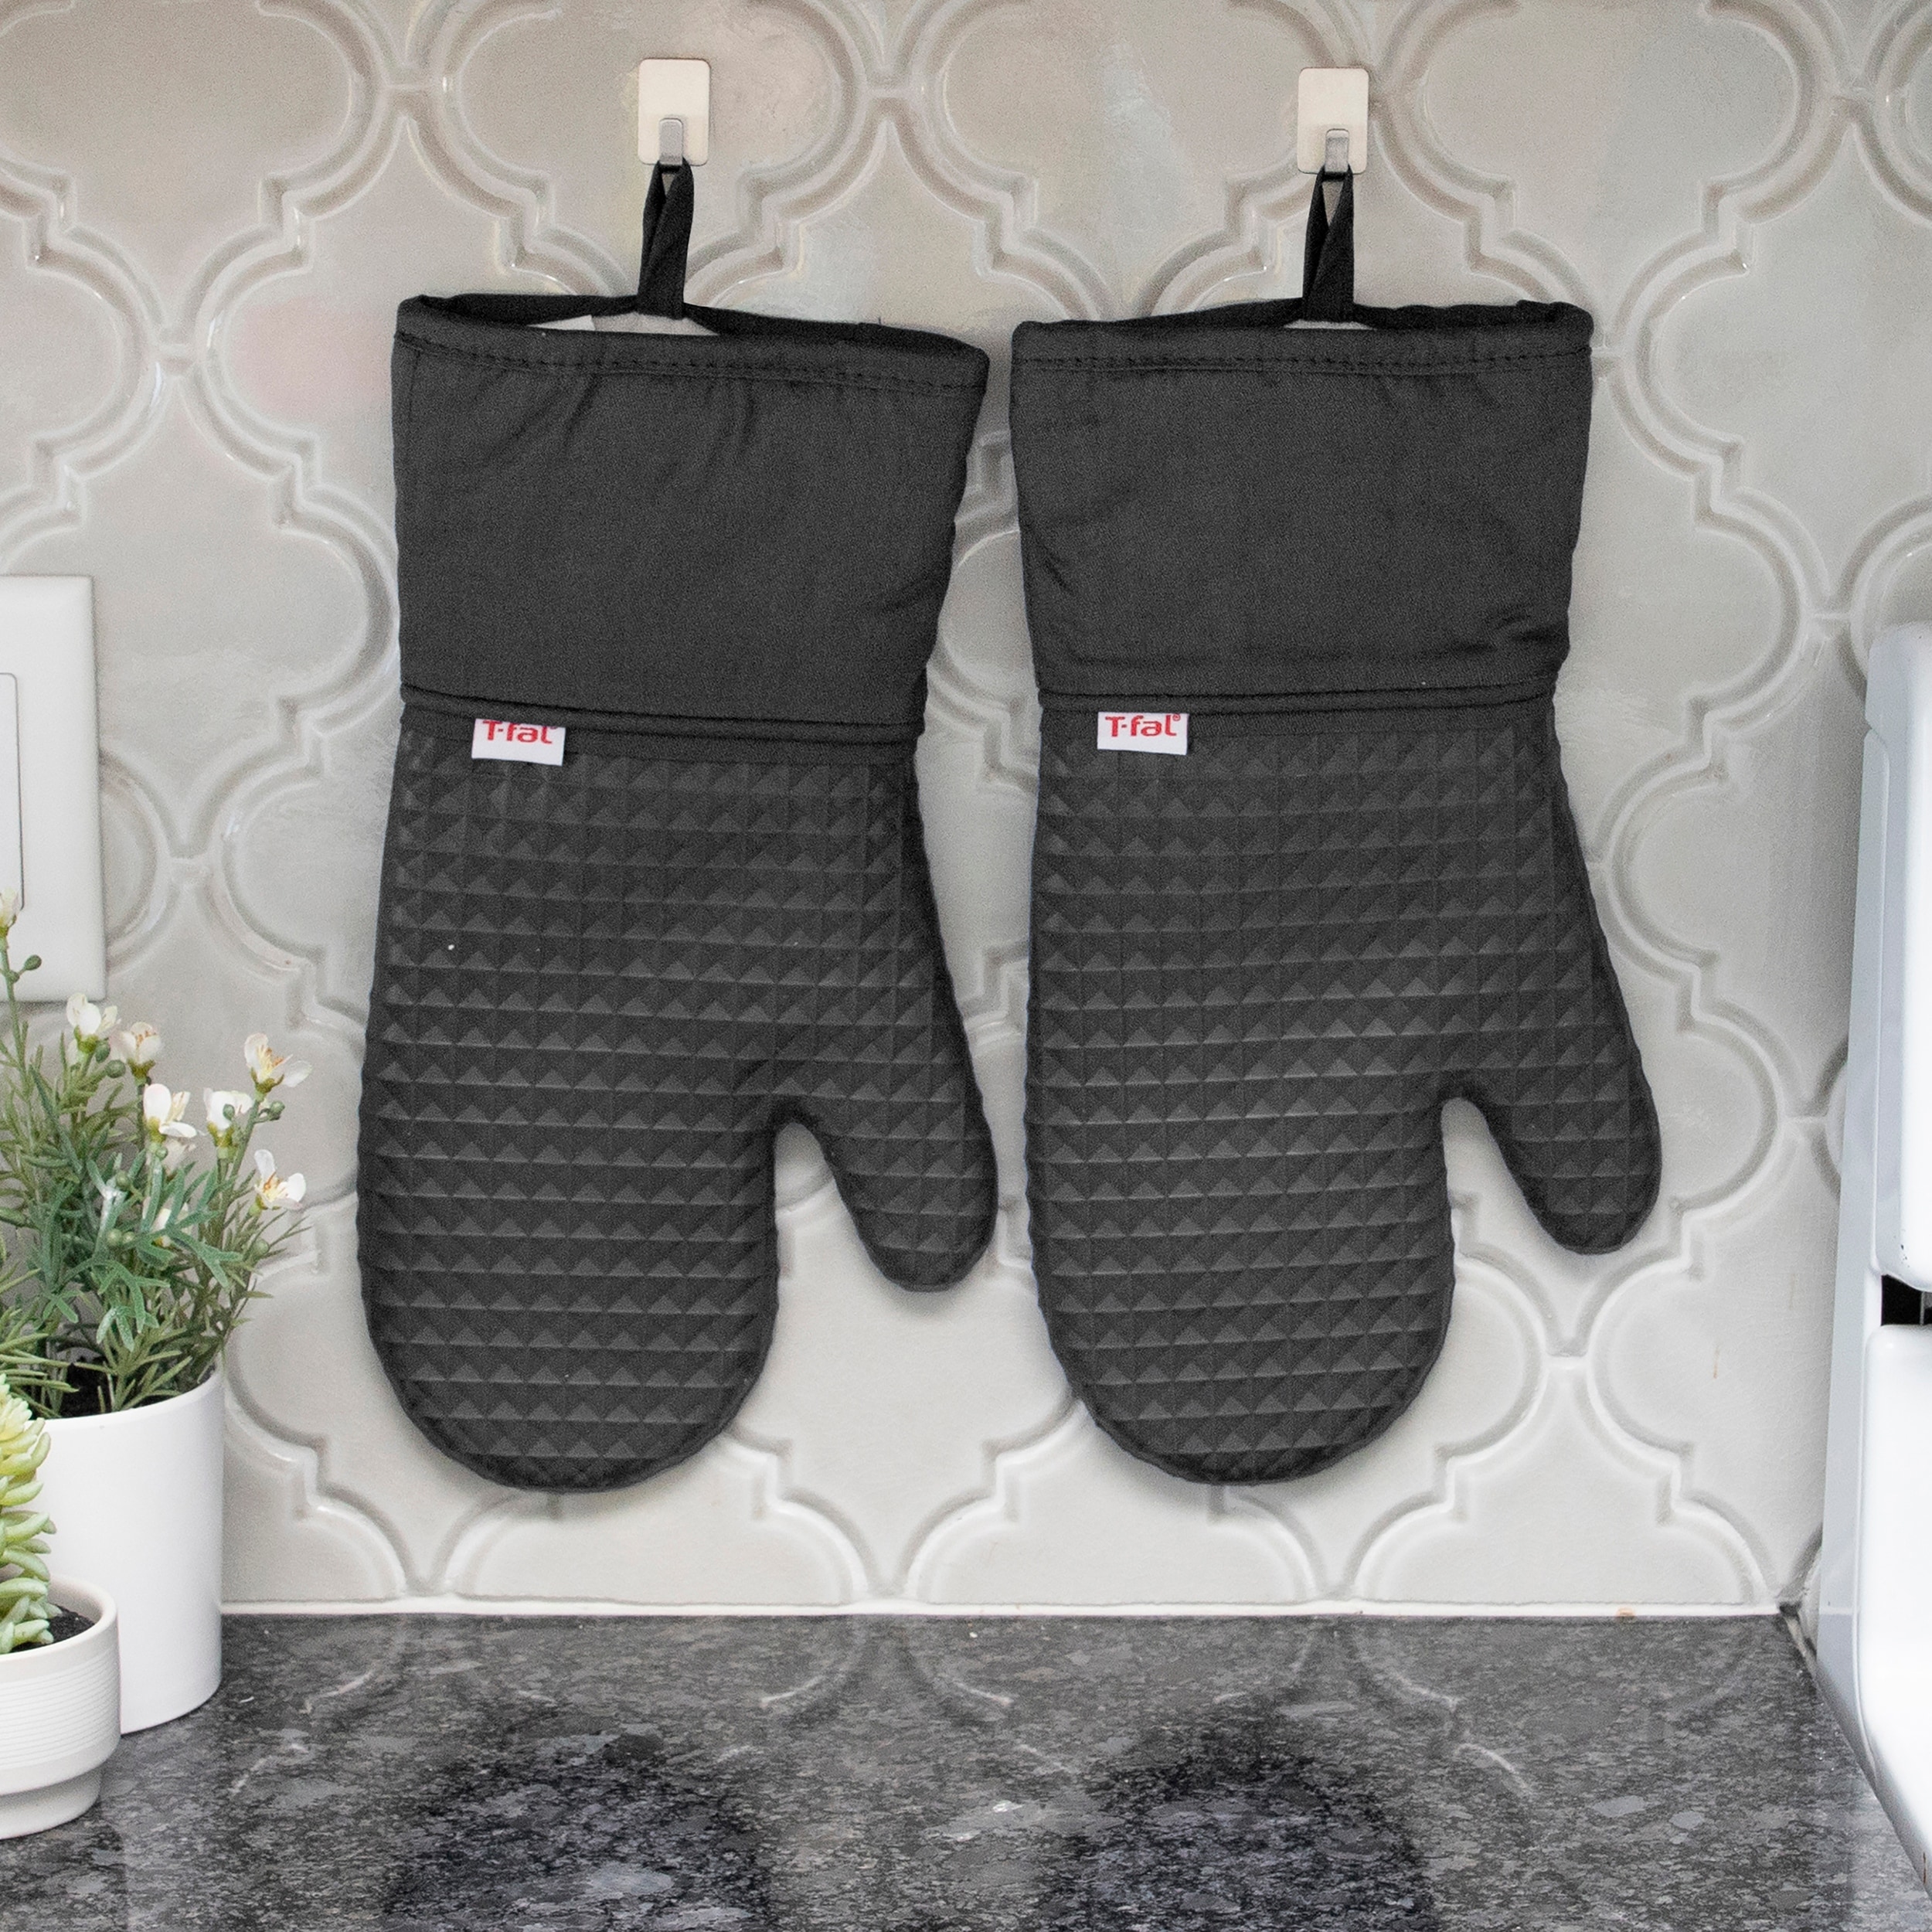 Lavish Home Oven Mitt One Pair Oversized Flame Heat Protection Big Mittens Pot  Holders Gray